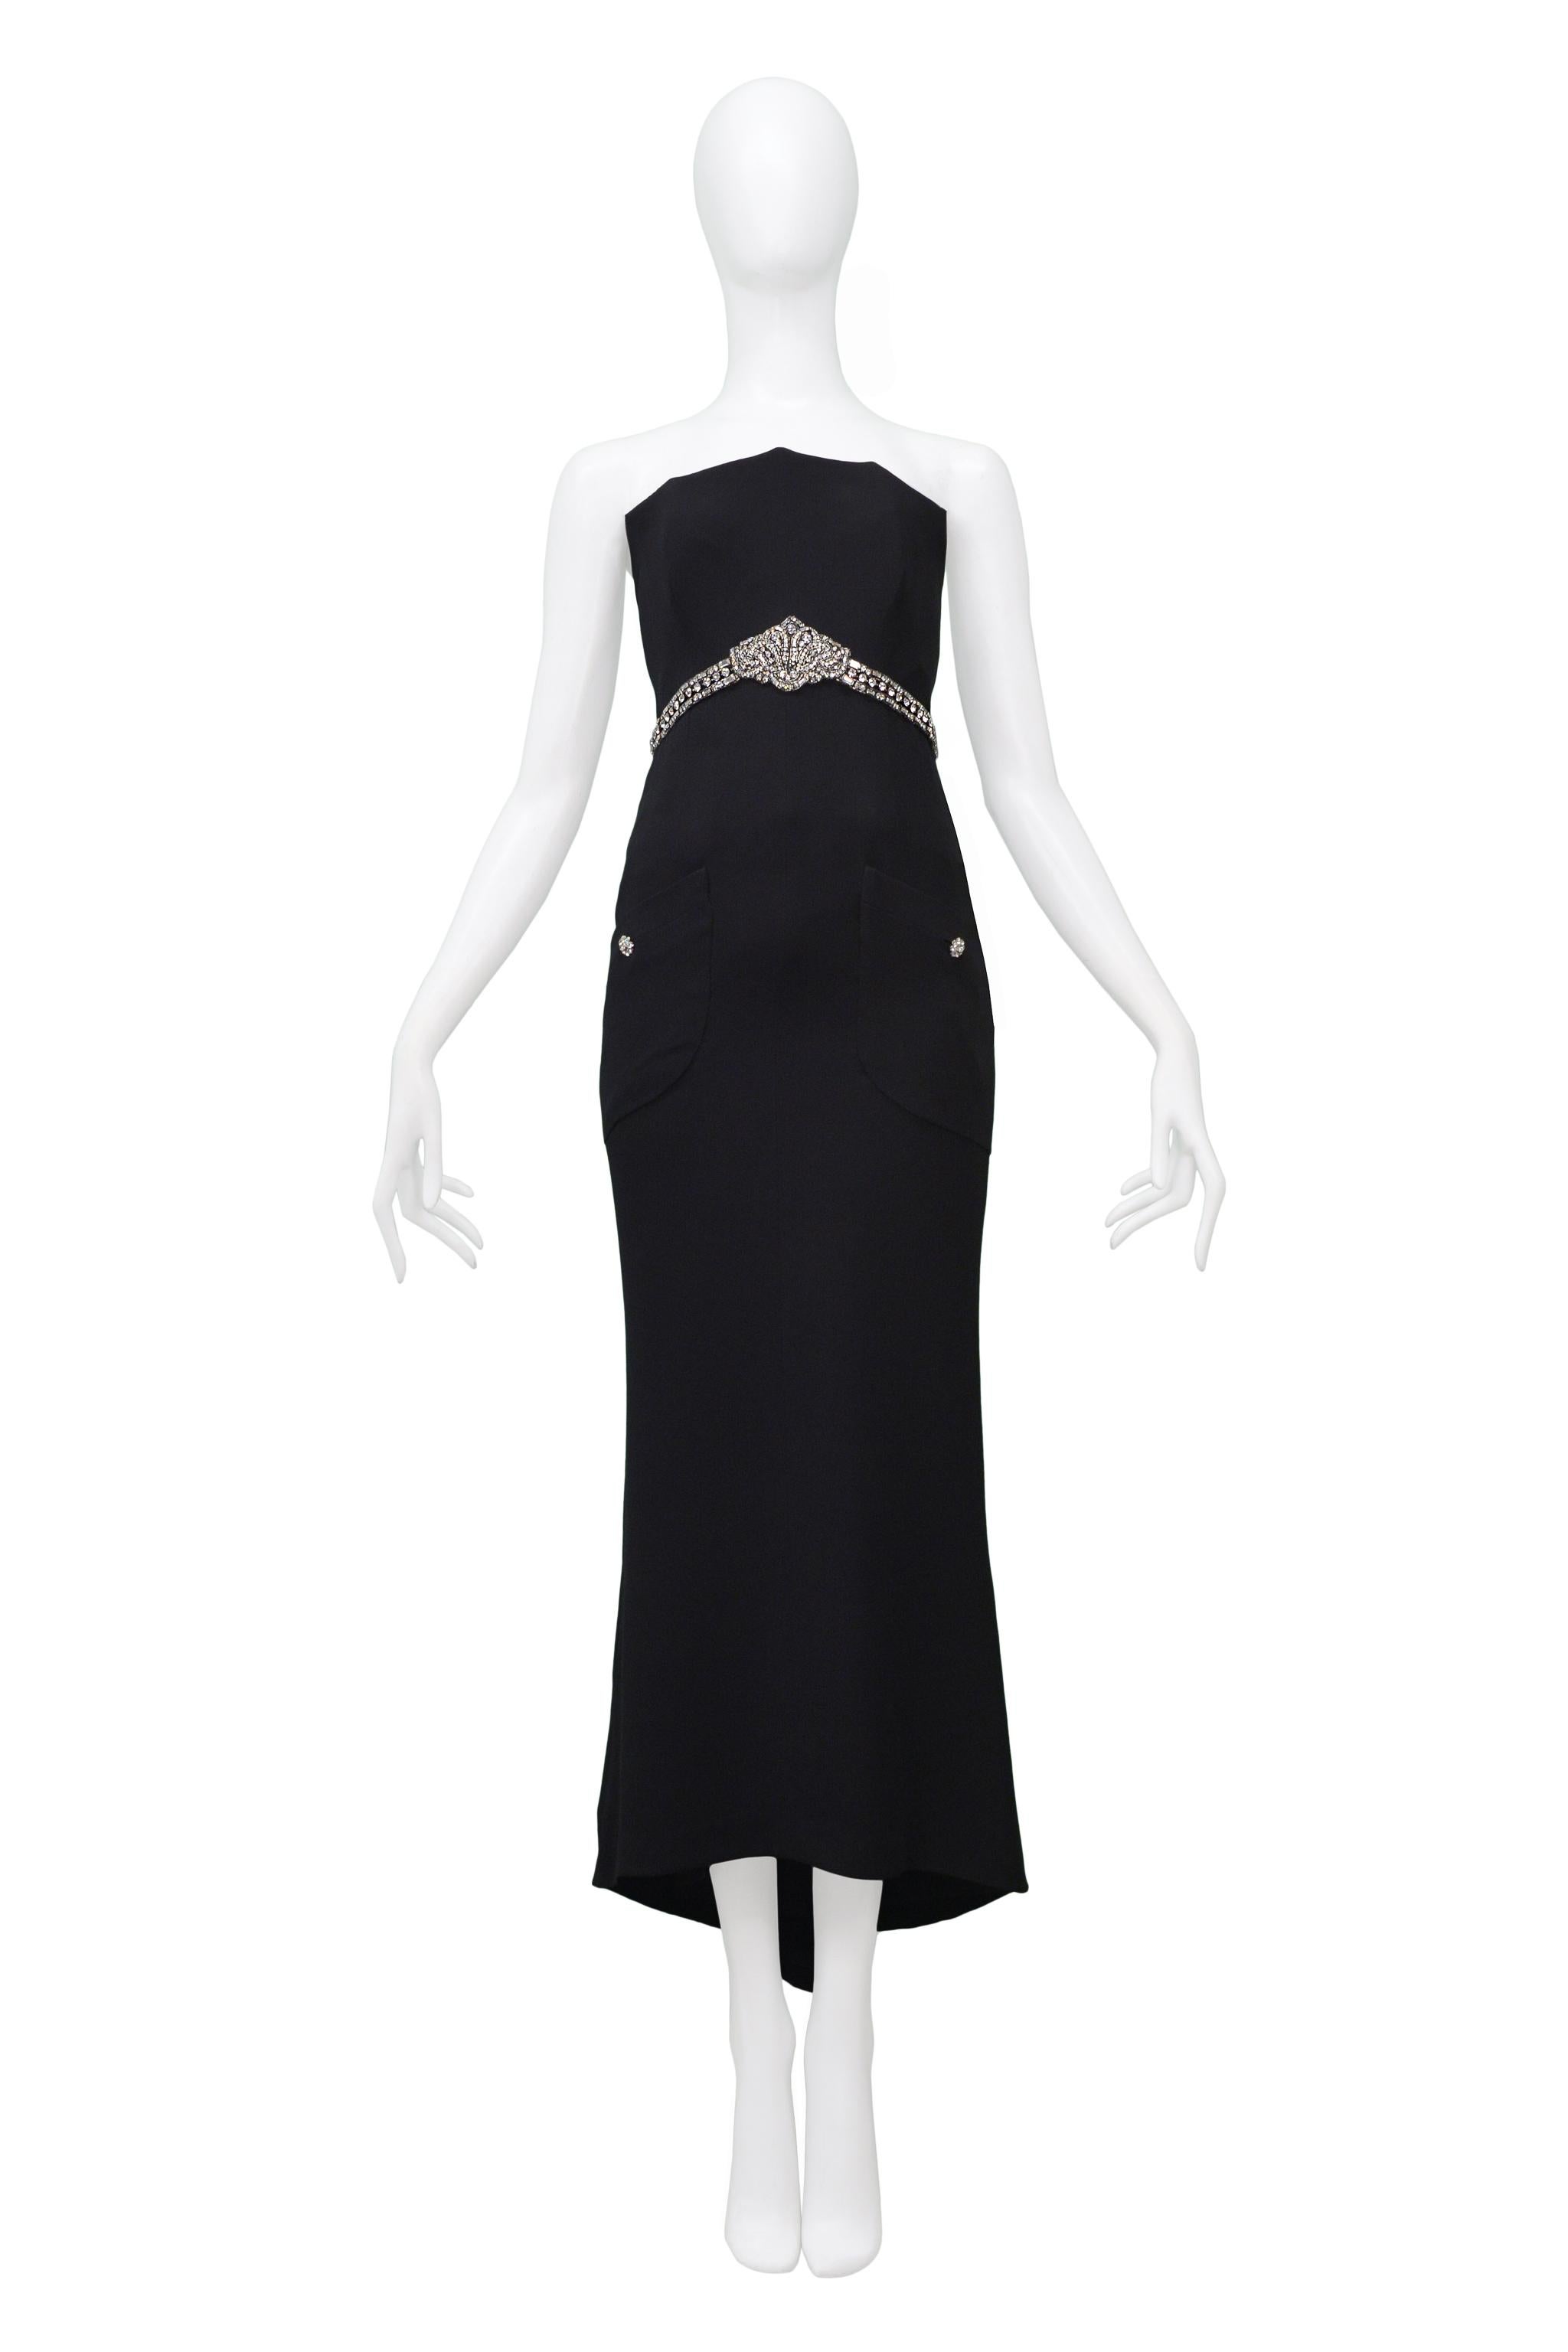 Resurrection Vintage is excited to offer a vintage Chanel black staples evening gown, featuring a webbed bodice, interior corset, rhinestone-encrusted empire waistband, and floral buttons, hand-stitched front pockets, and center back zipper.